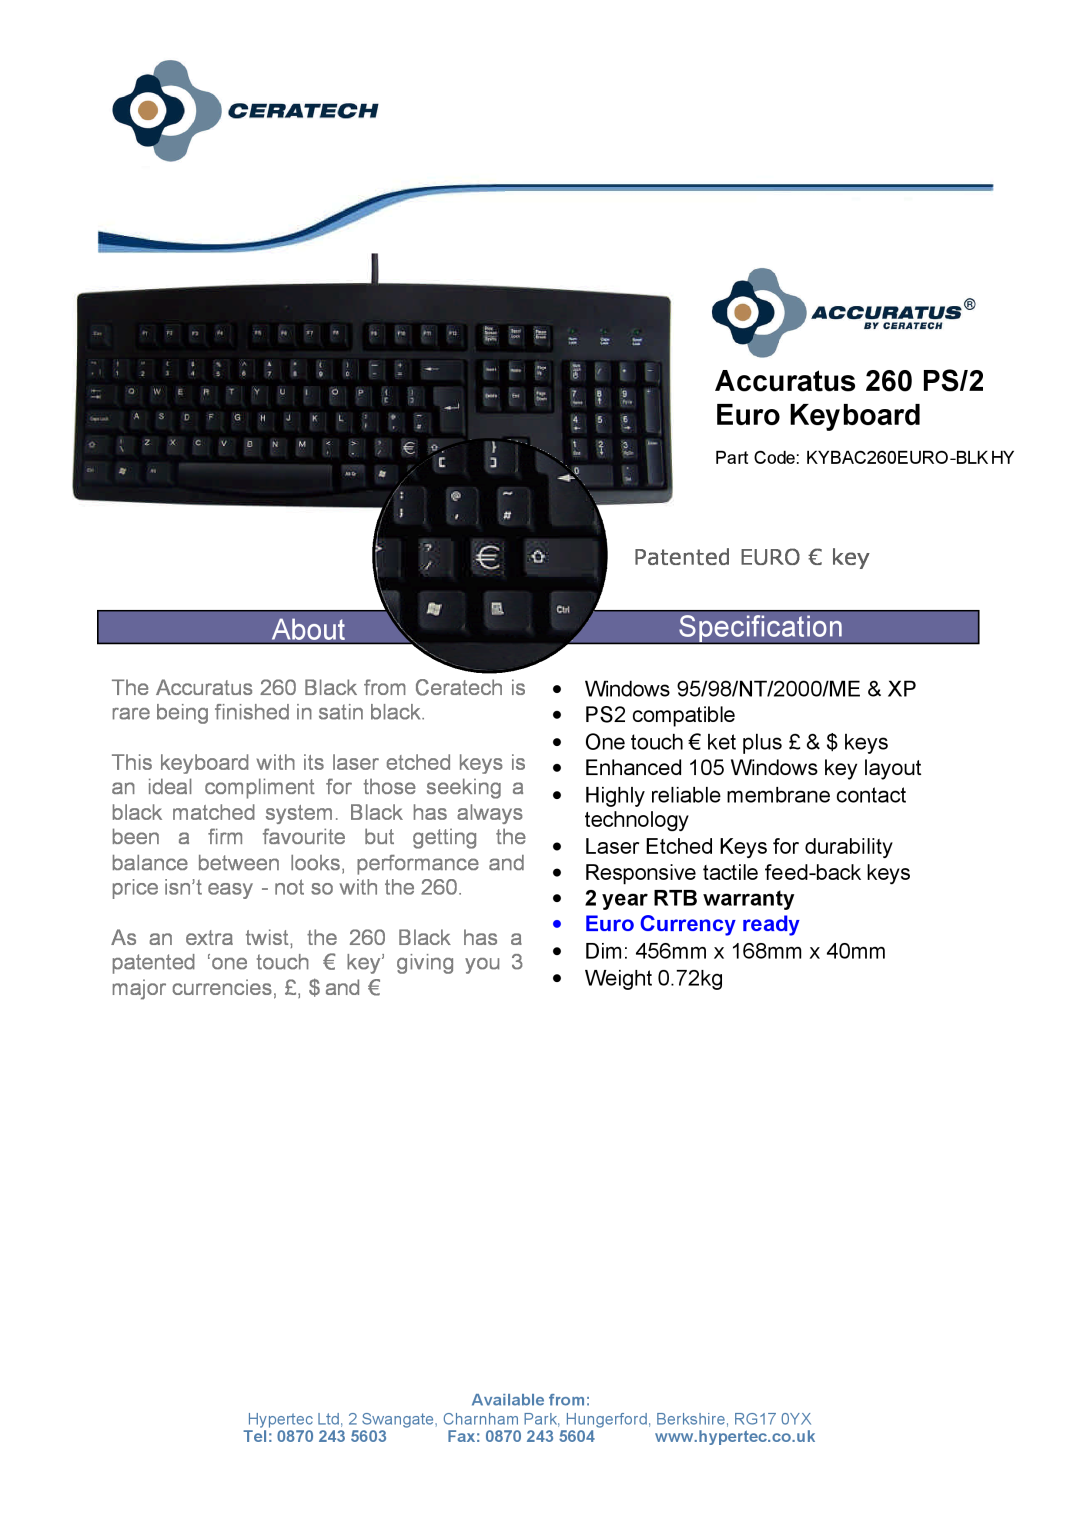 Hypertec warranty About, Accuratus 260 PS/2 Euro Keyboard, Specification, Patented EURO € key, ∙ 2 year RTB warranty 